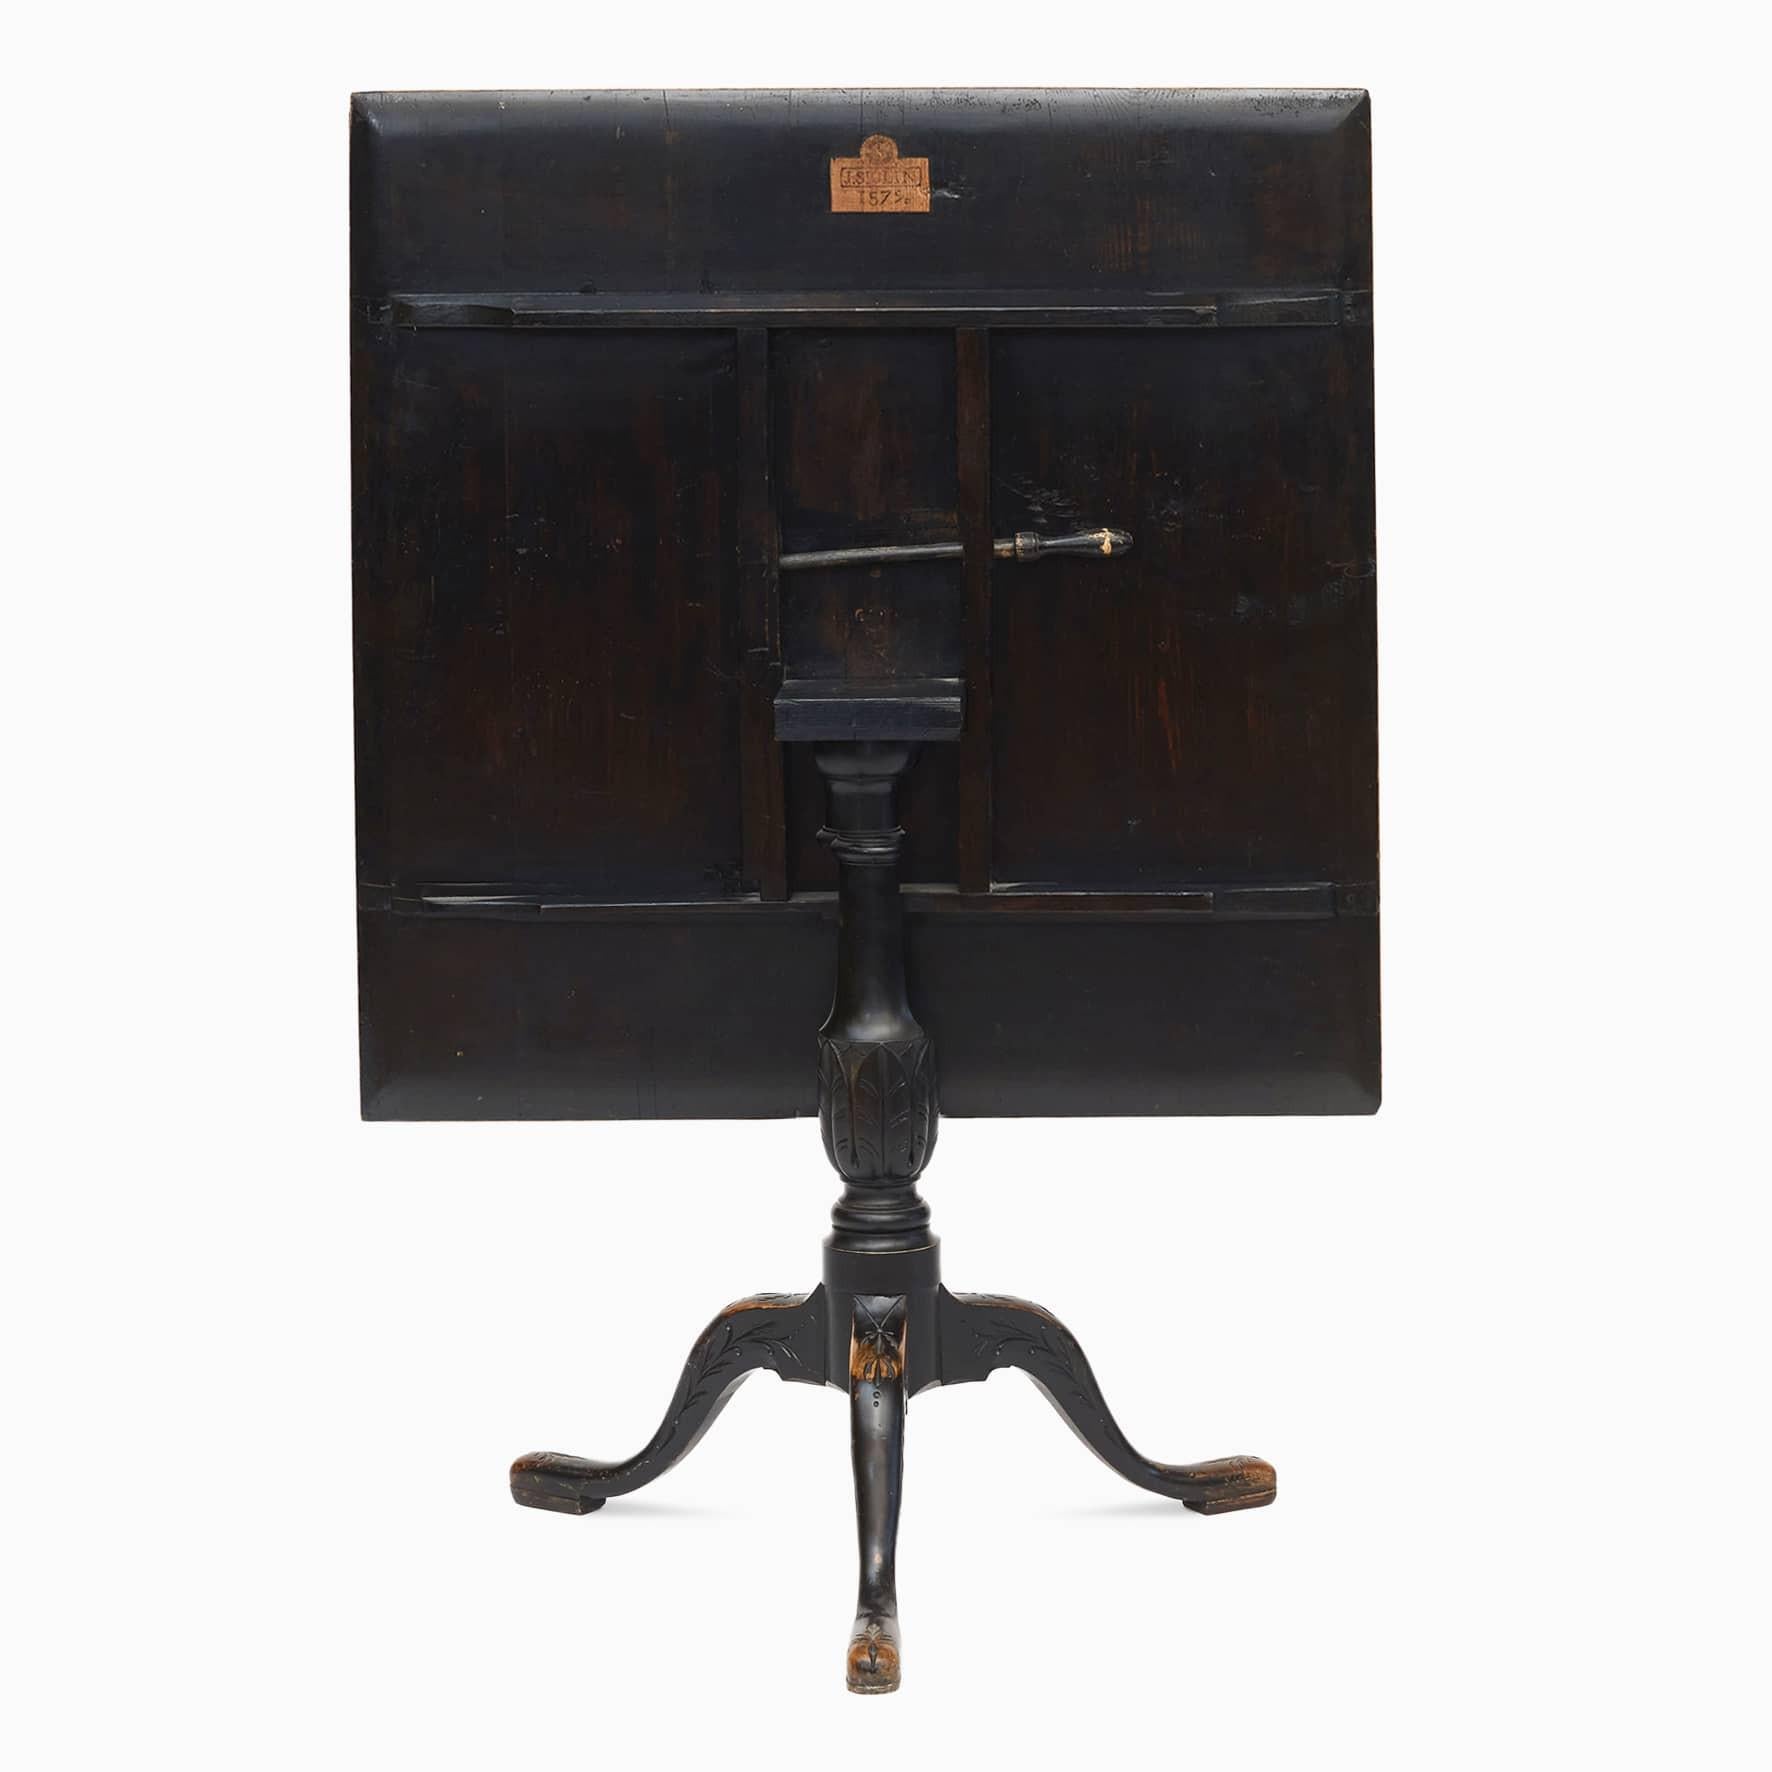 Antique Swedish Empire Tilt-Top Table, 1810 - 1820 In Good Condition For Sale In Kastrup, DK